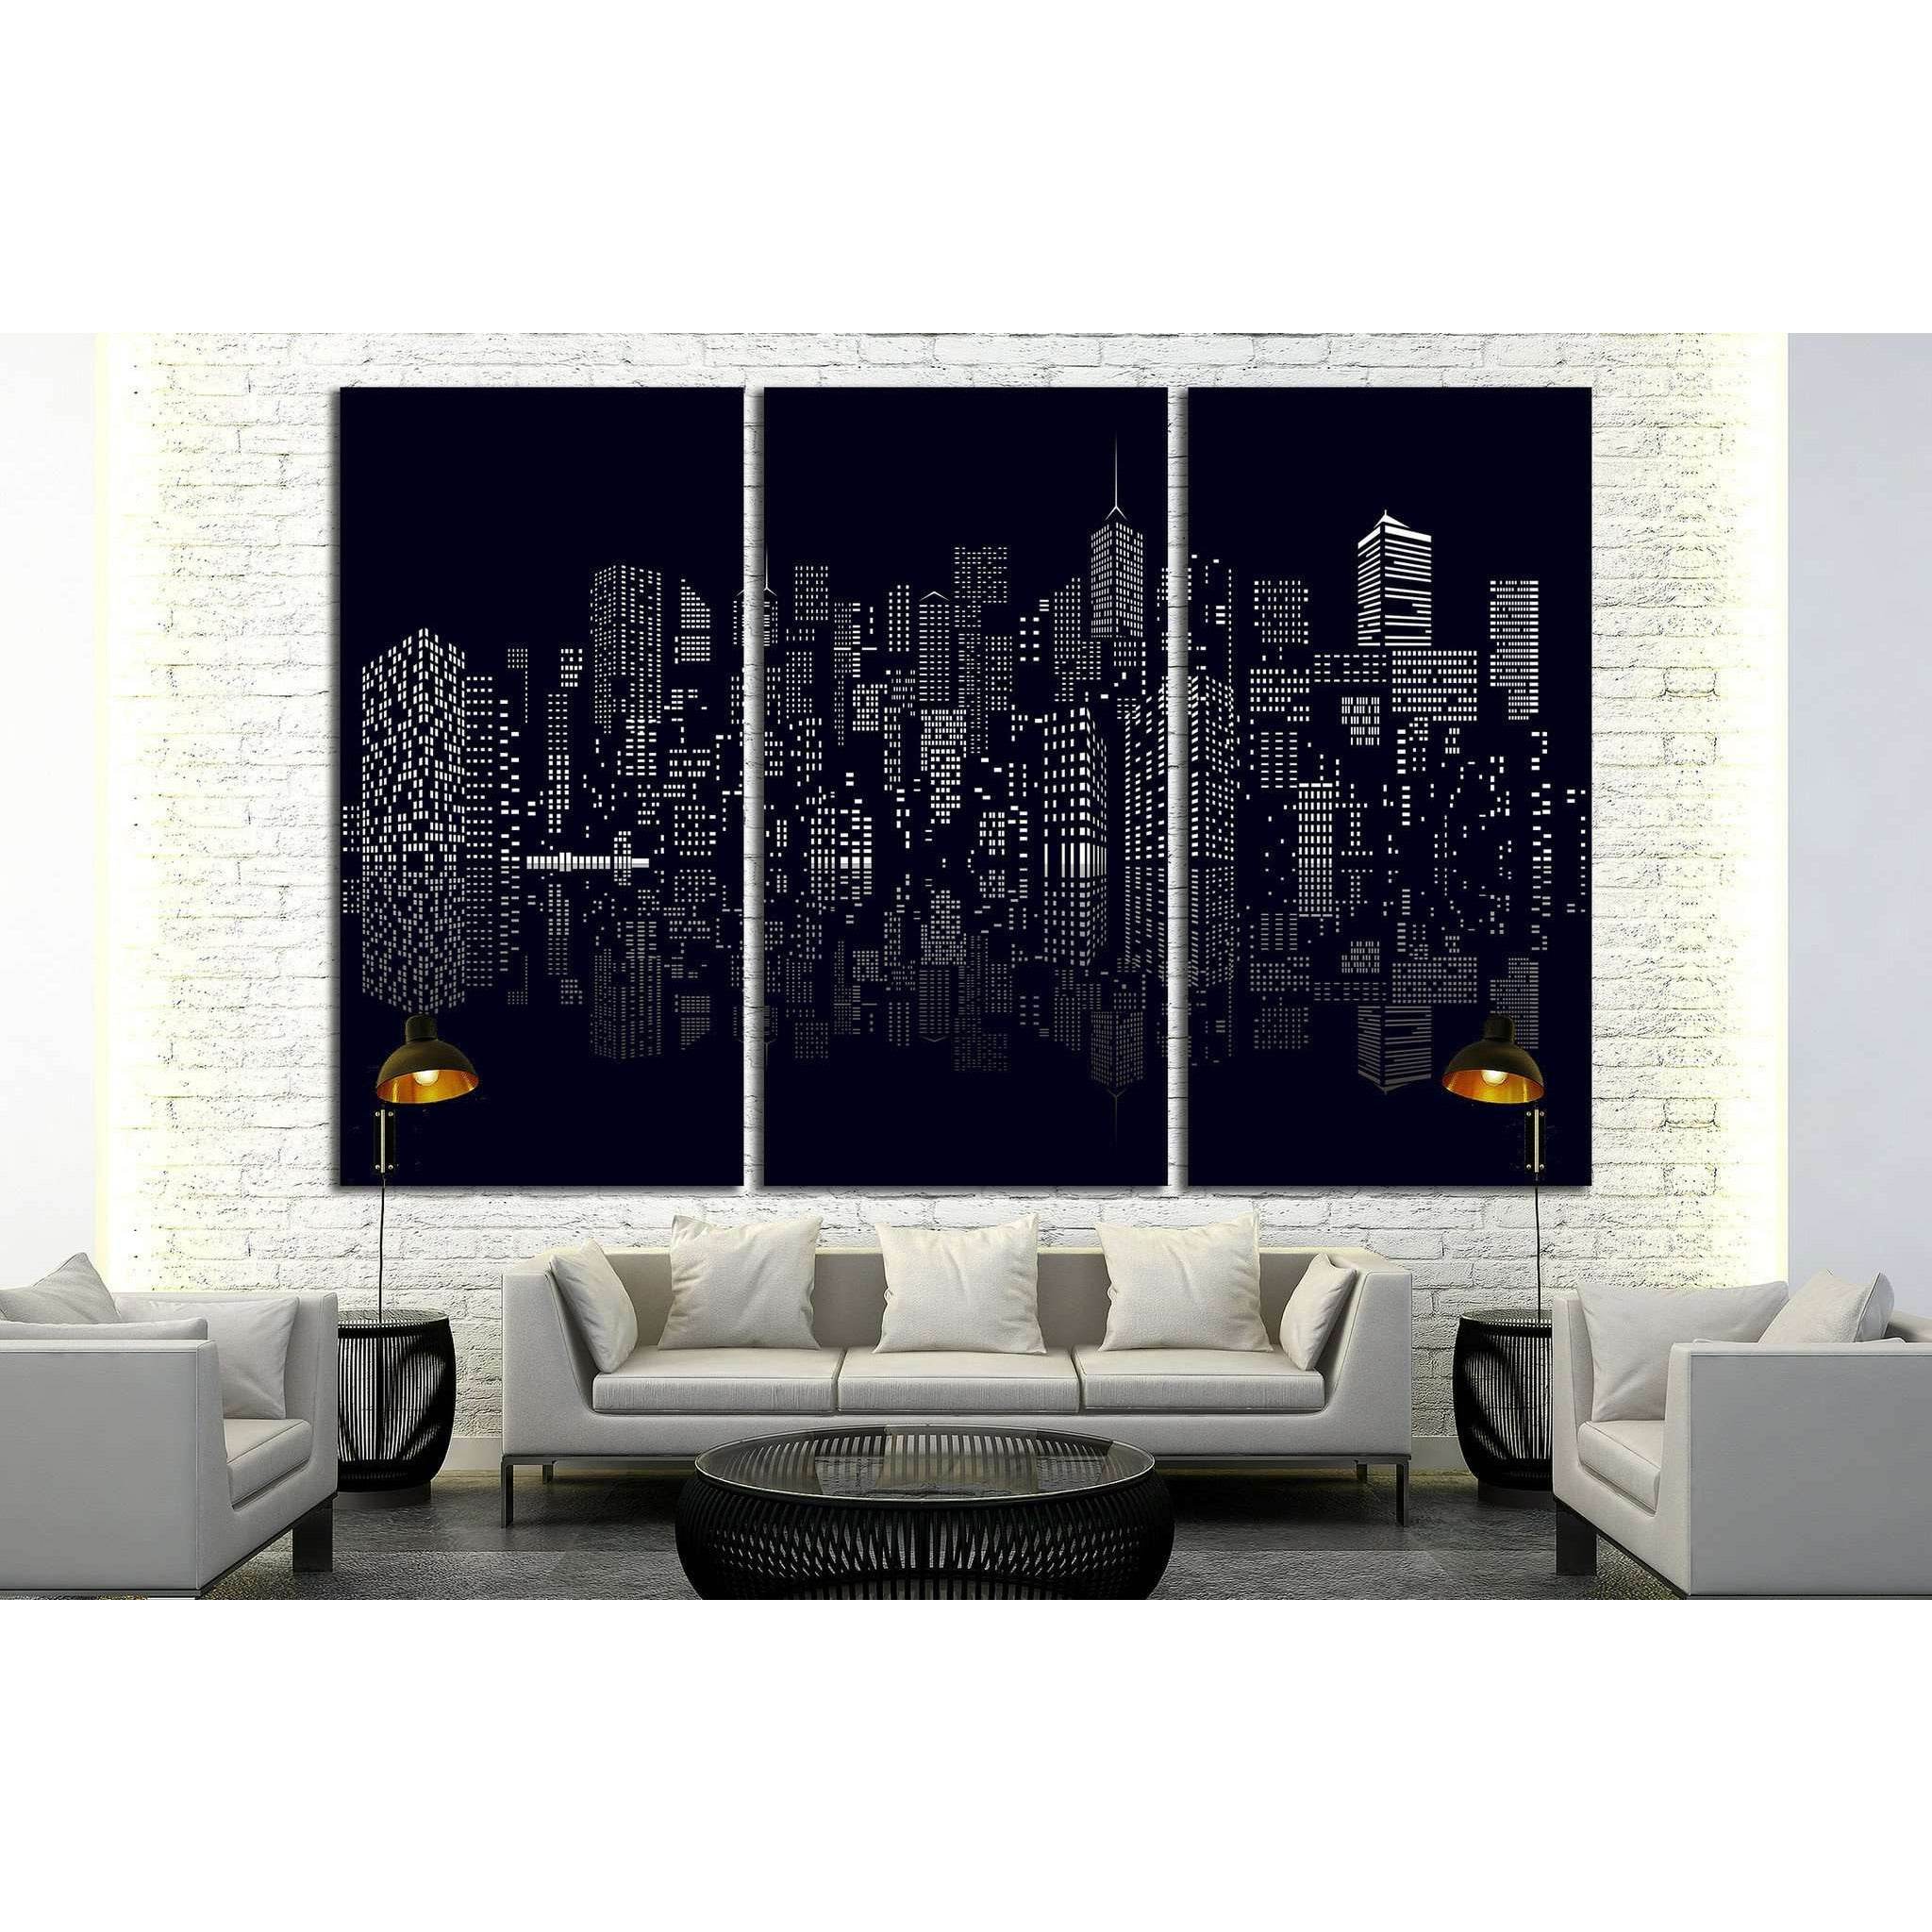 windows on abstract city skylines in black and white №1926 Ready to Hang Canvas Print